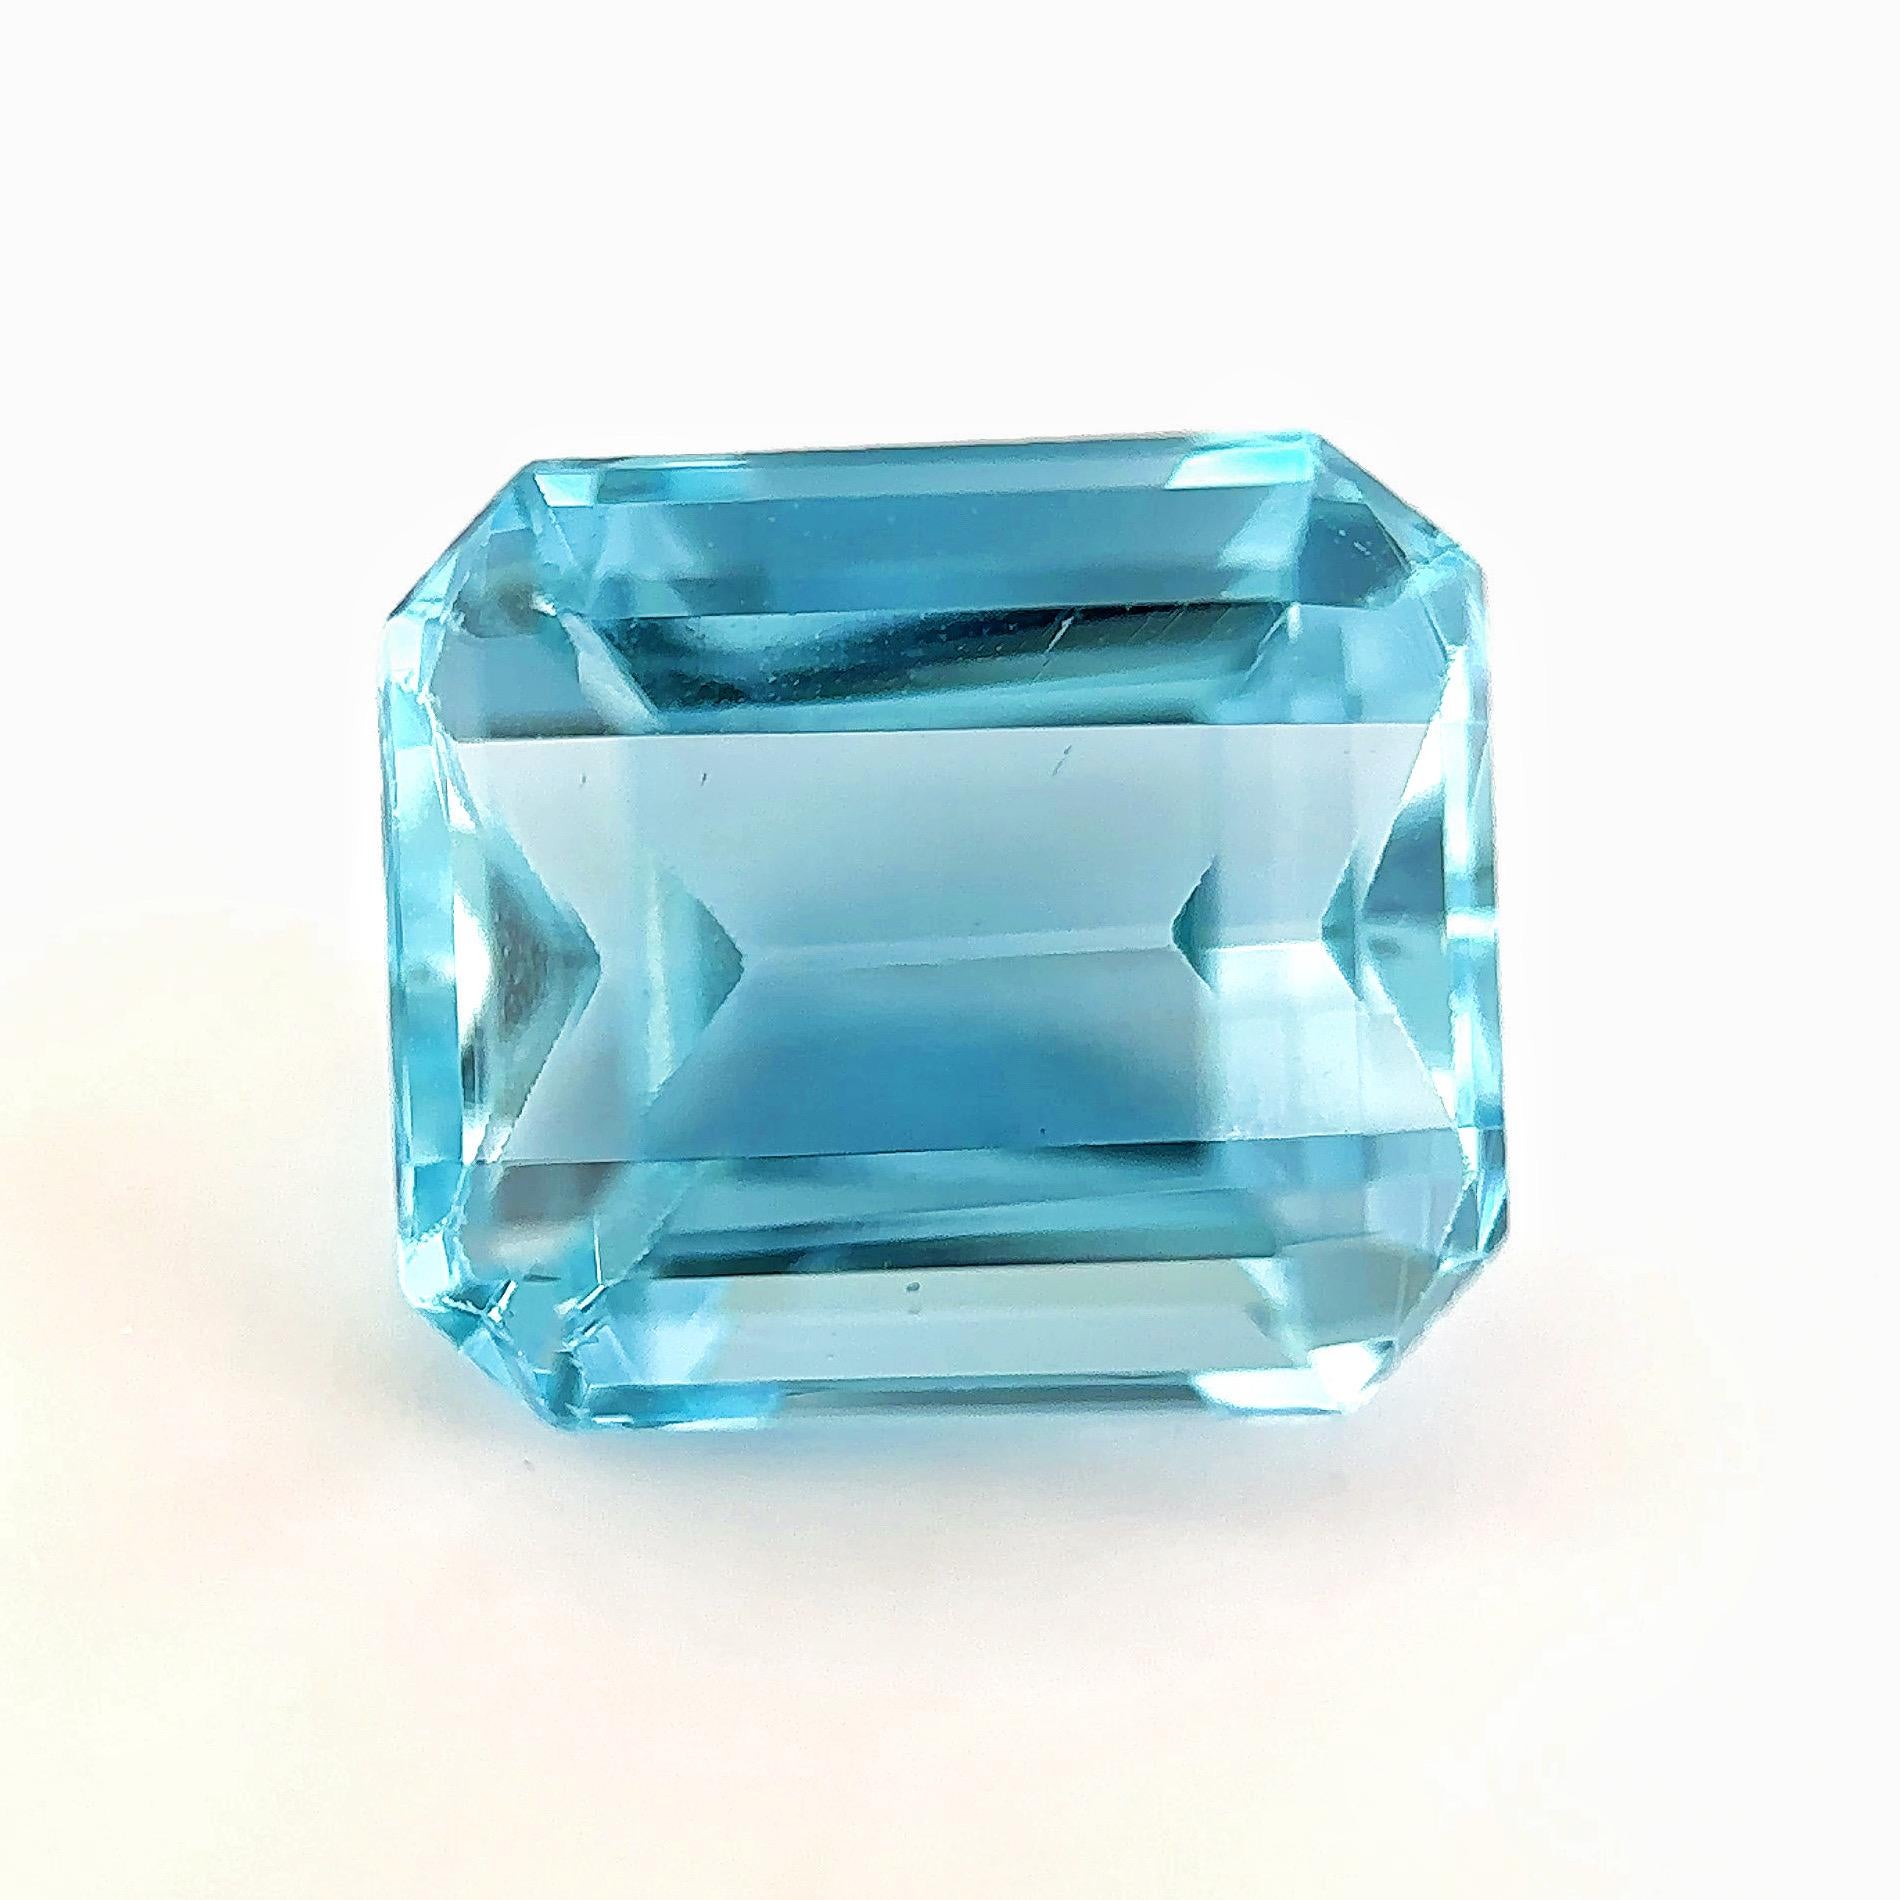 3.27 Carat Natural Santa Maria Color Aquamarine Loose Stone

Appointed lab certificate can be arranged upon request

This Item is ideal for your design as an engagement ring, cocktail ring, necklace, bracelet, etc.


ABOUT US

Xuelai Jewellery